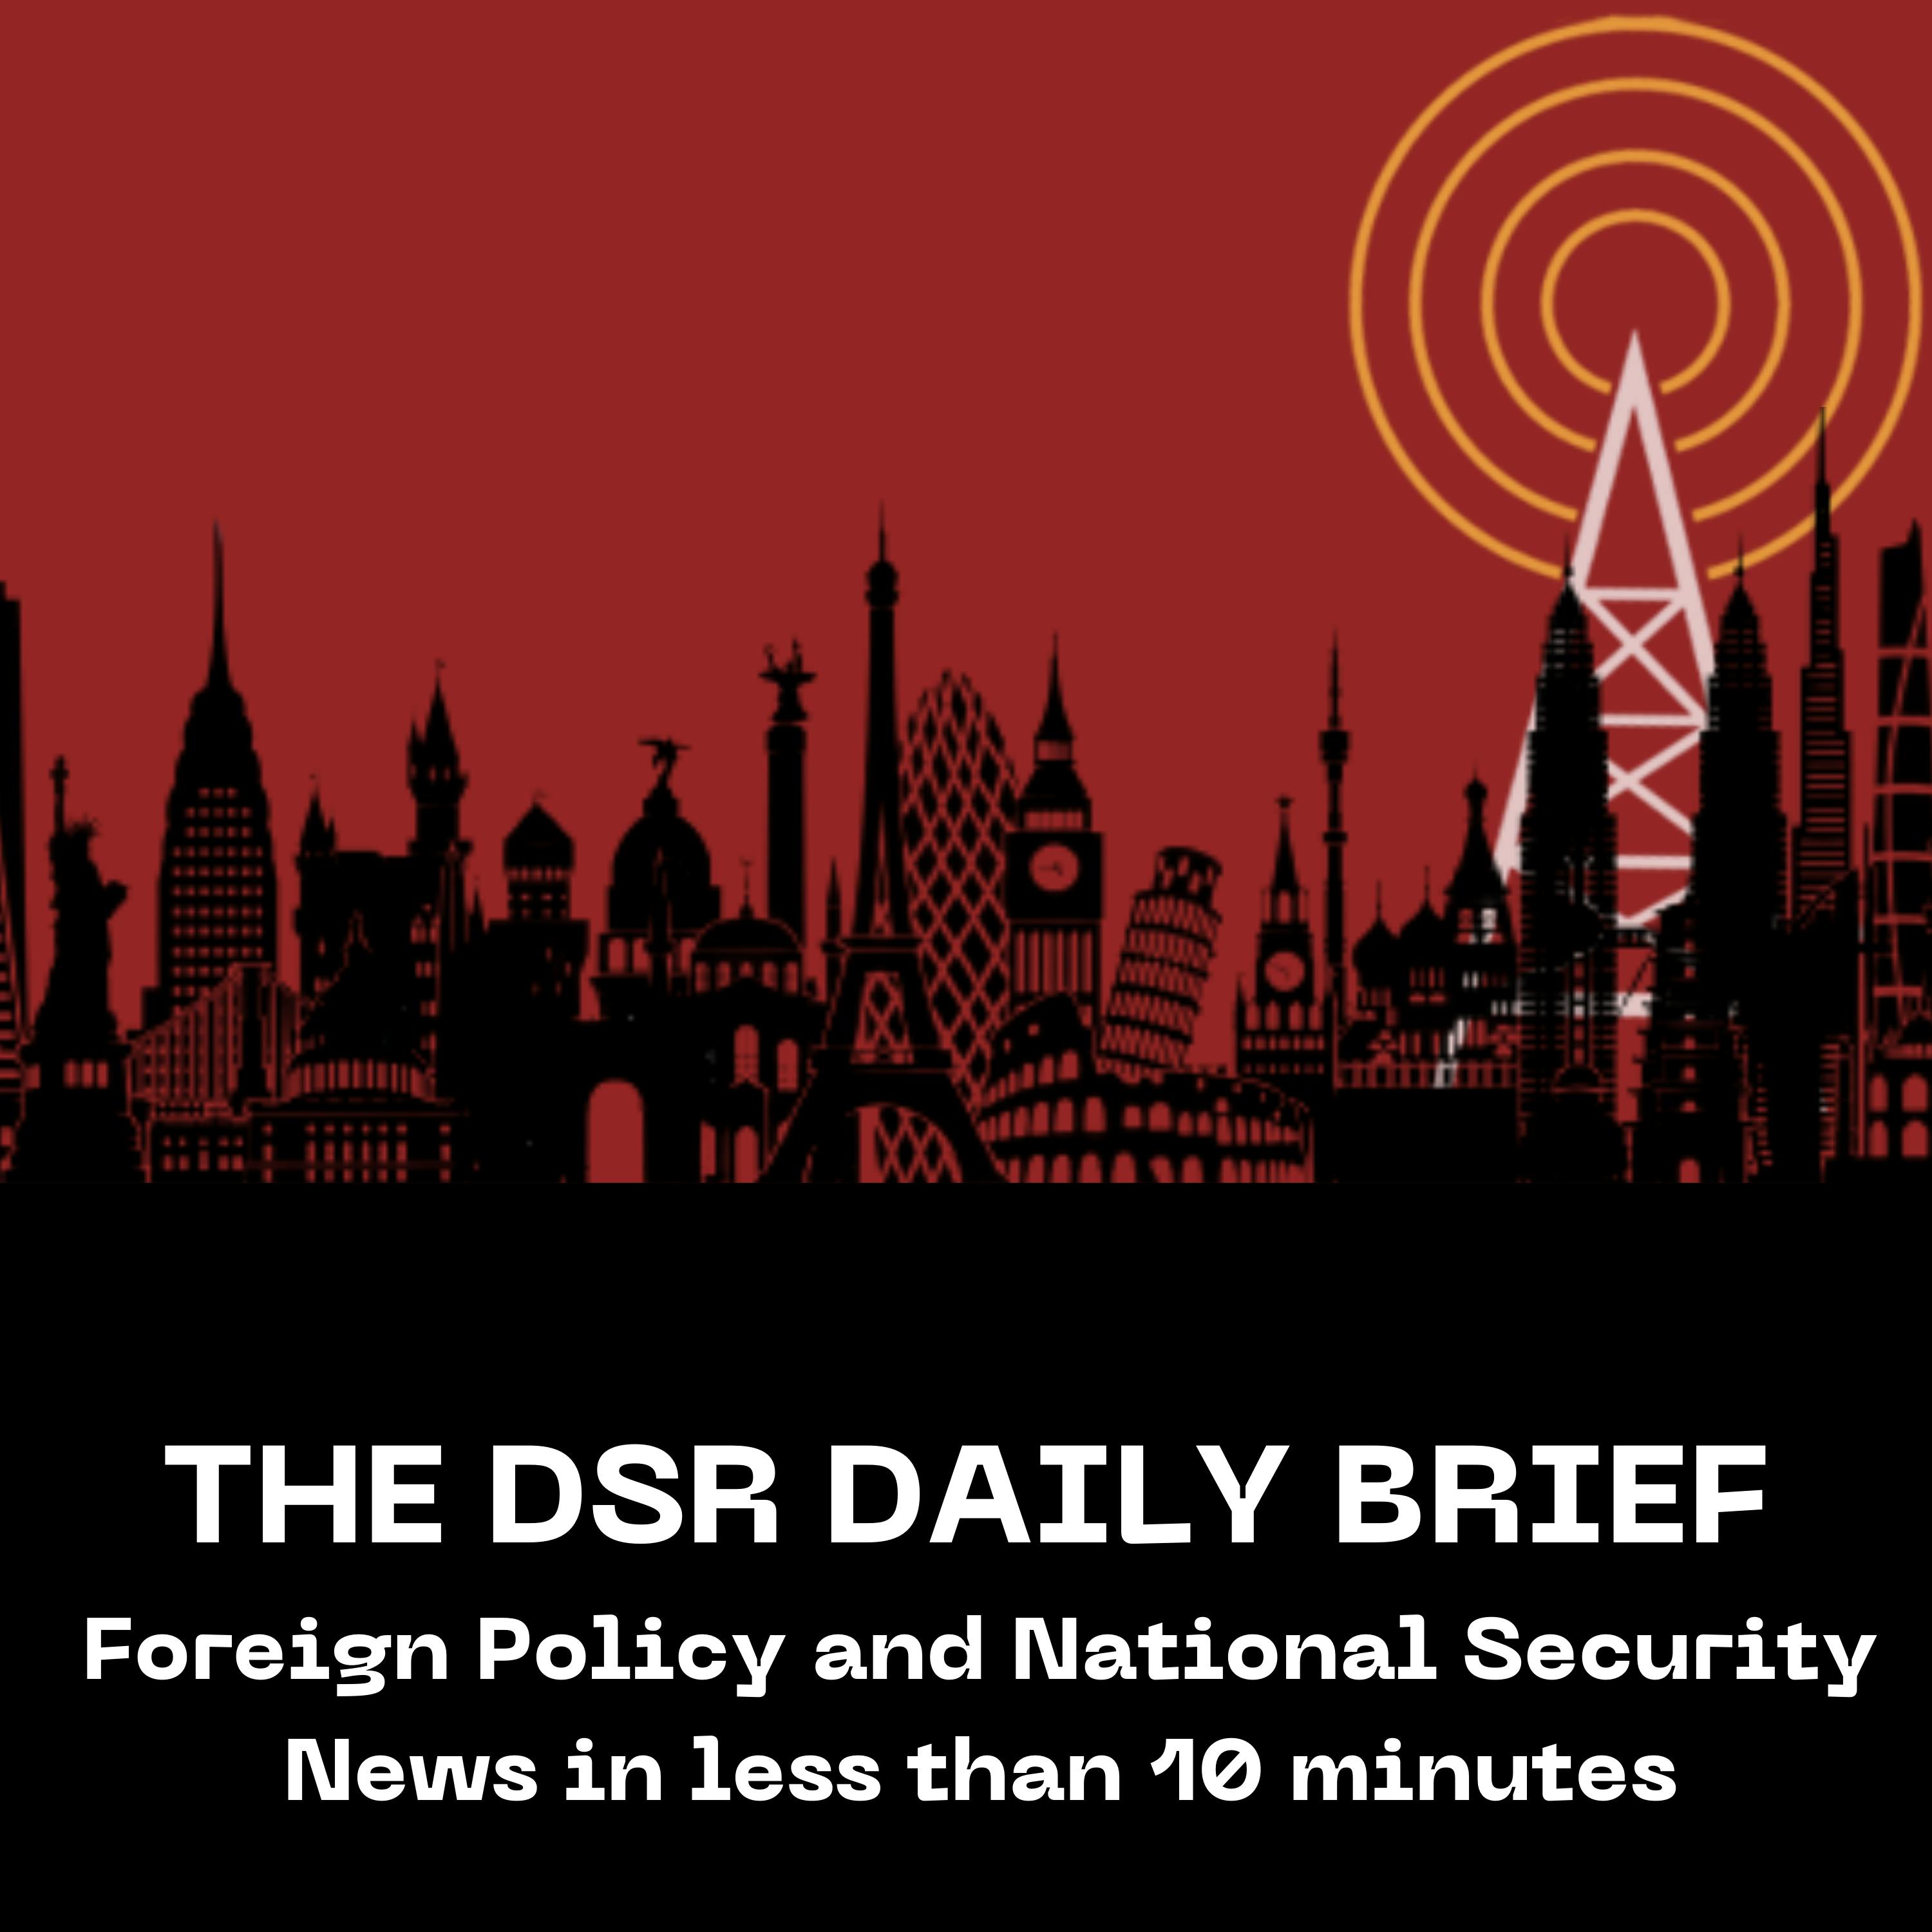 The DSR Daily for April 25: Arizona House Repeals Abortion Ban, Ukraine Uses Long-Range US Missiles